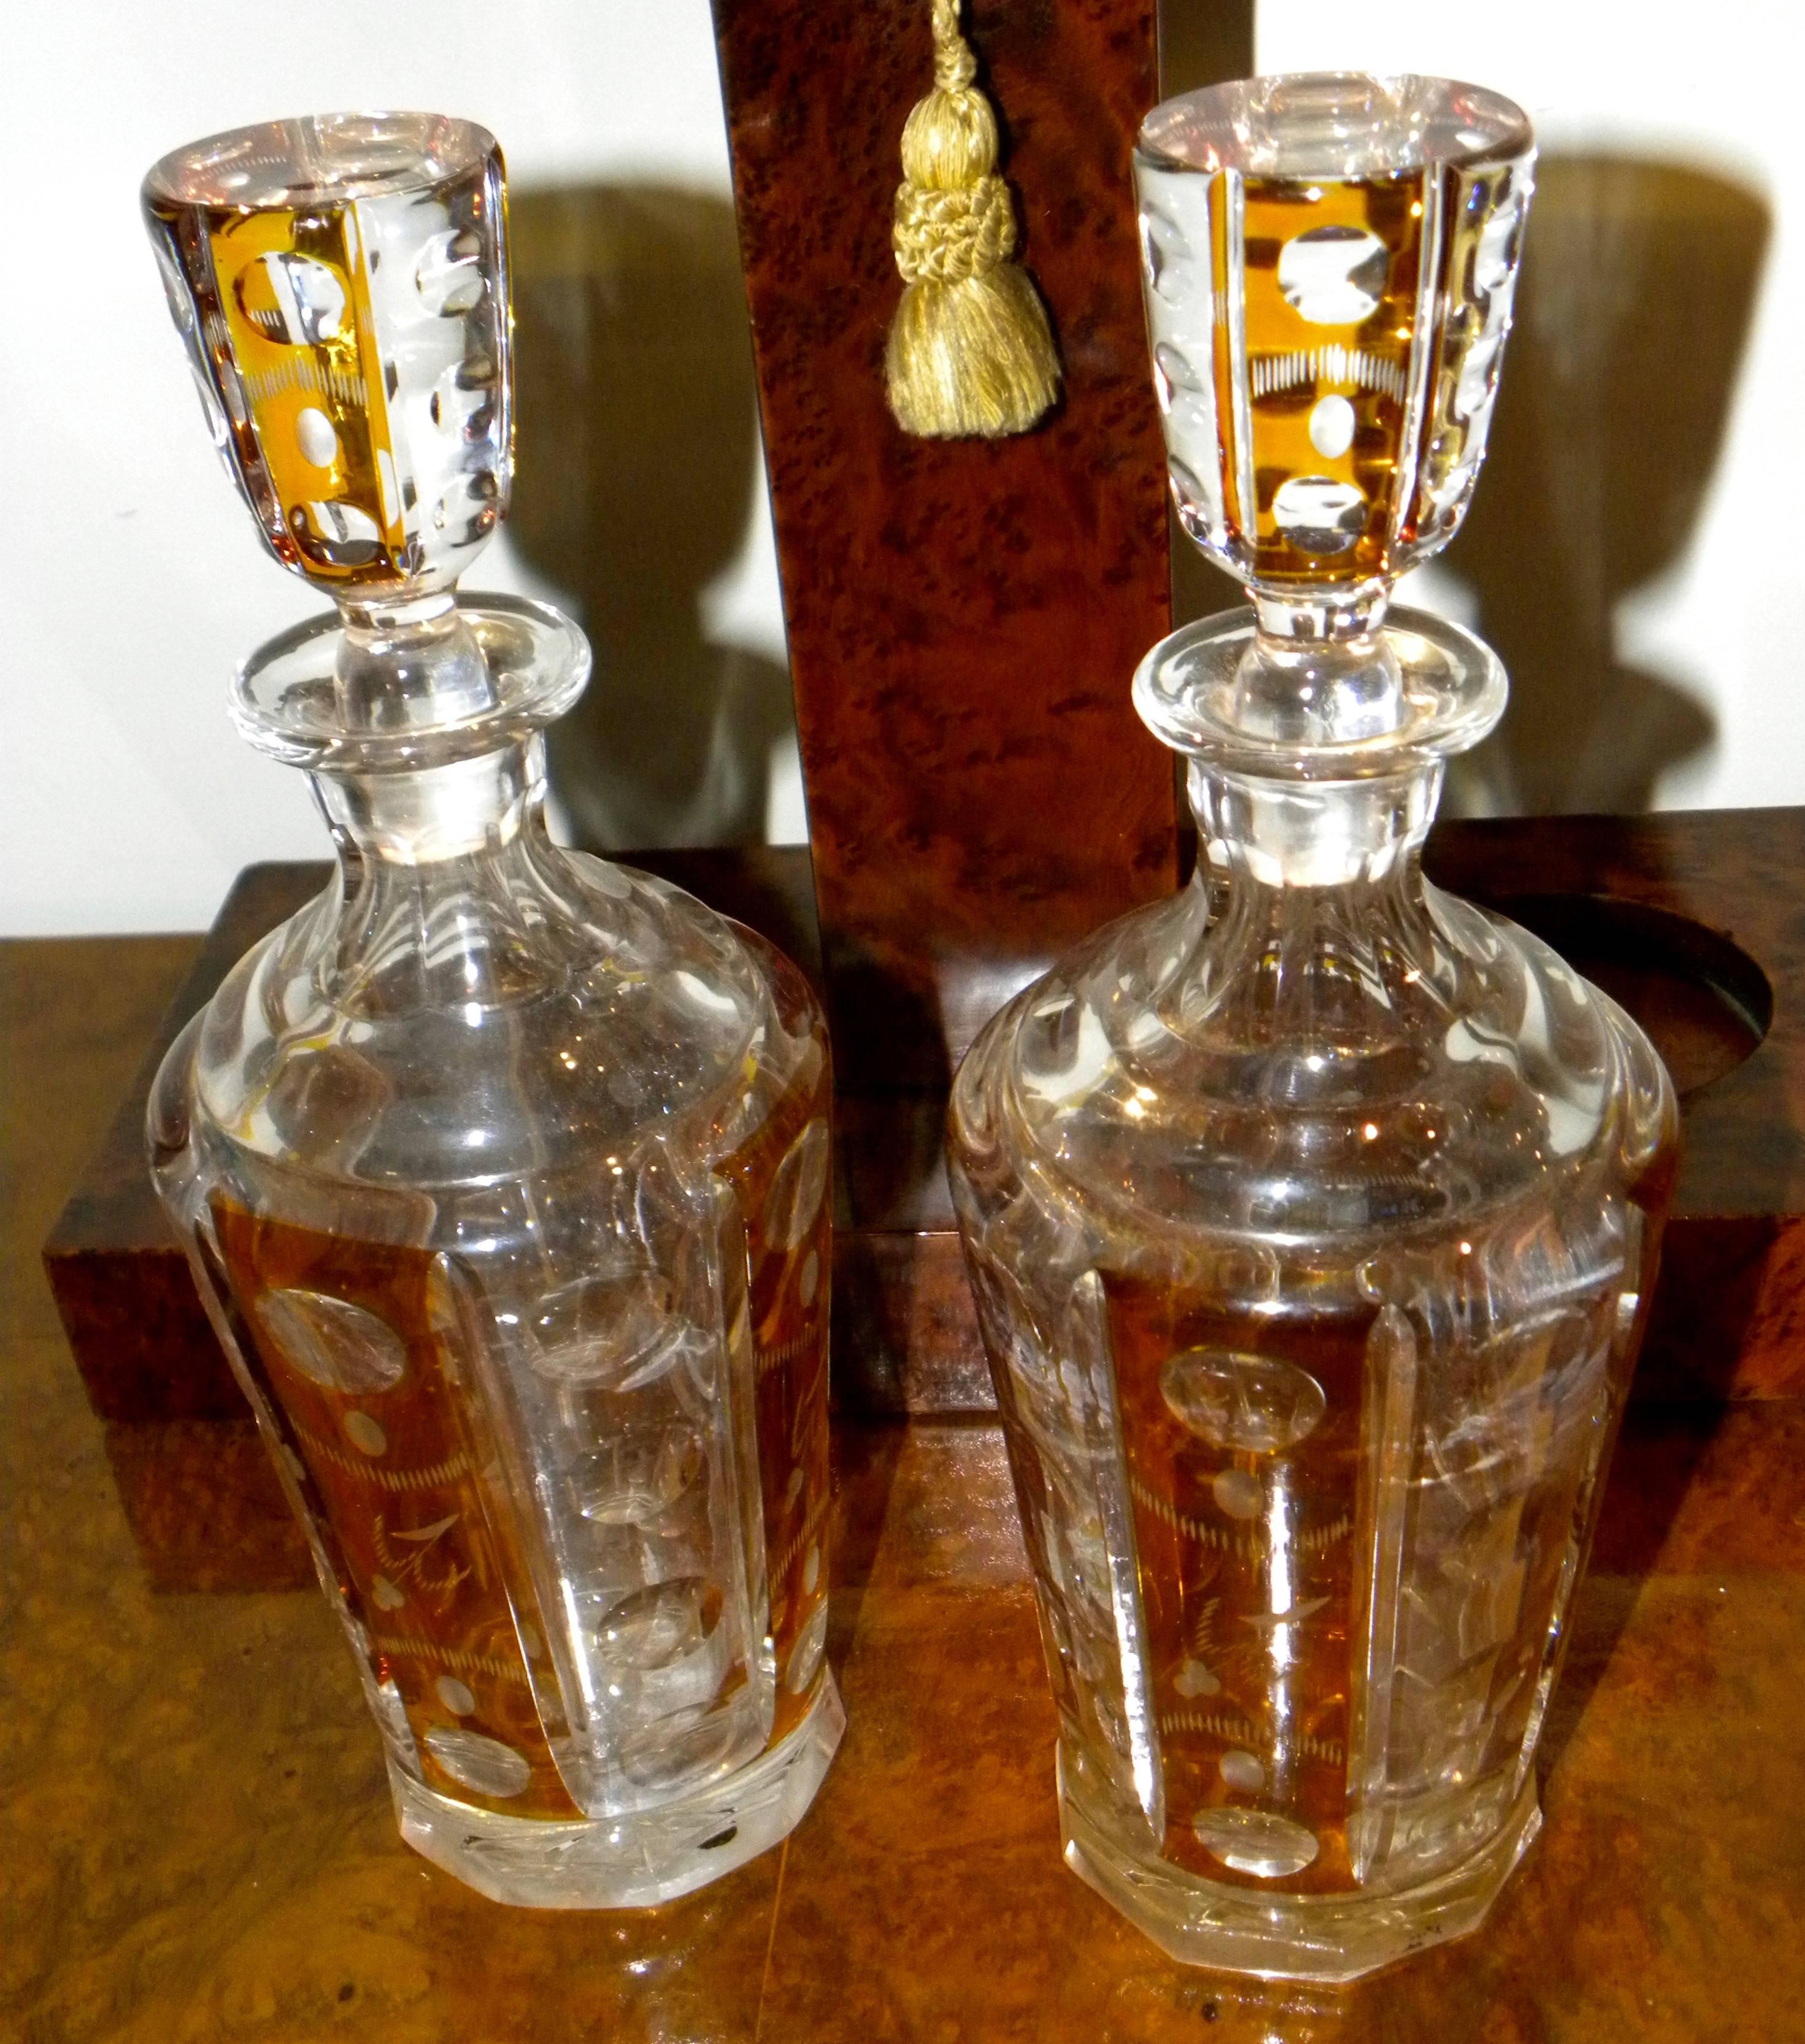 Elegant Art Deco tantalus stand and set. Two perfect cut-glass crystal decanters in an unusual amber color with matching top stoppers. This beautiful amboyna burl wood frames sets off the color of the glass in a unique way and holds the glass